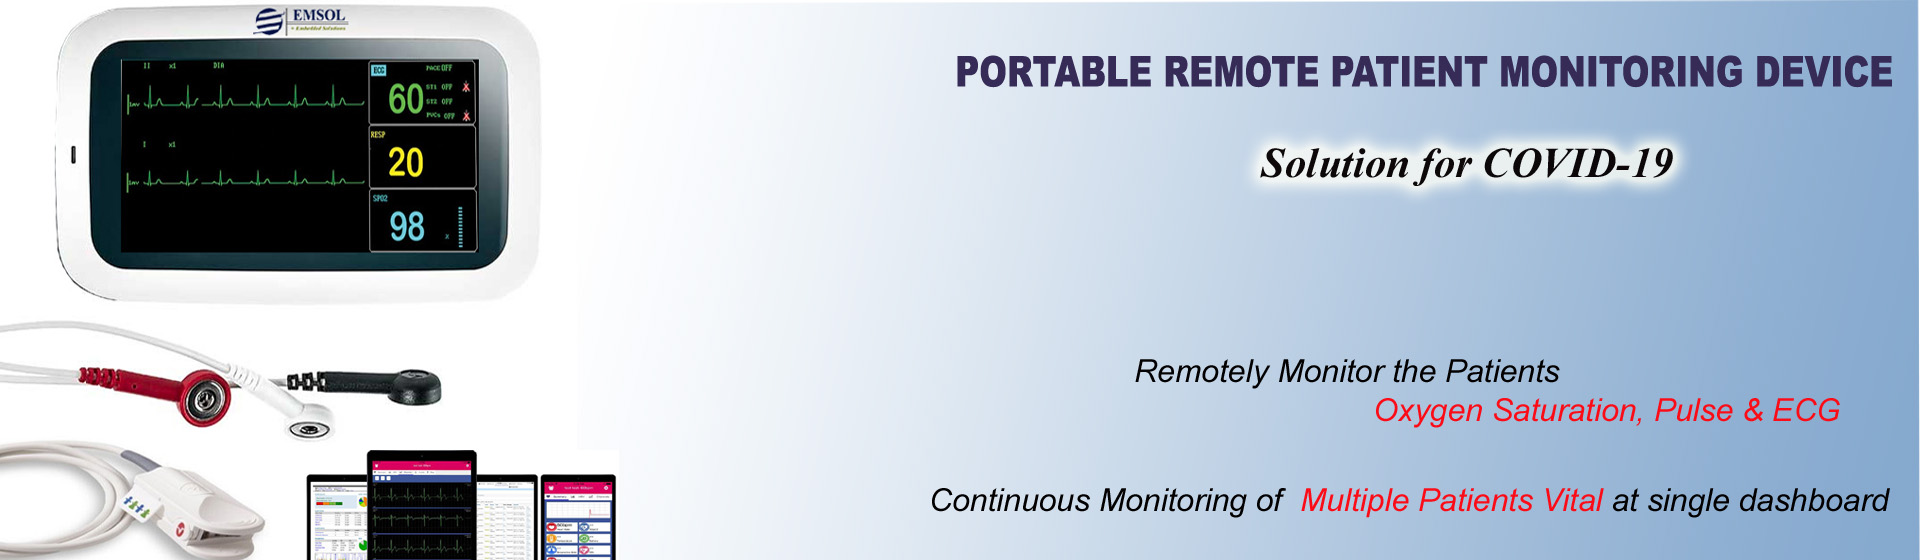 portable remote patient monitoring device